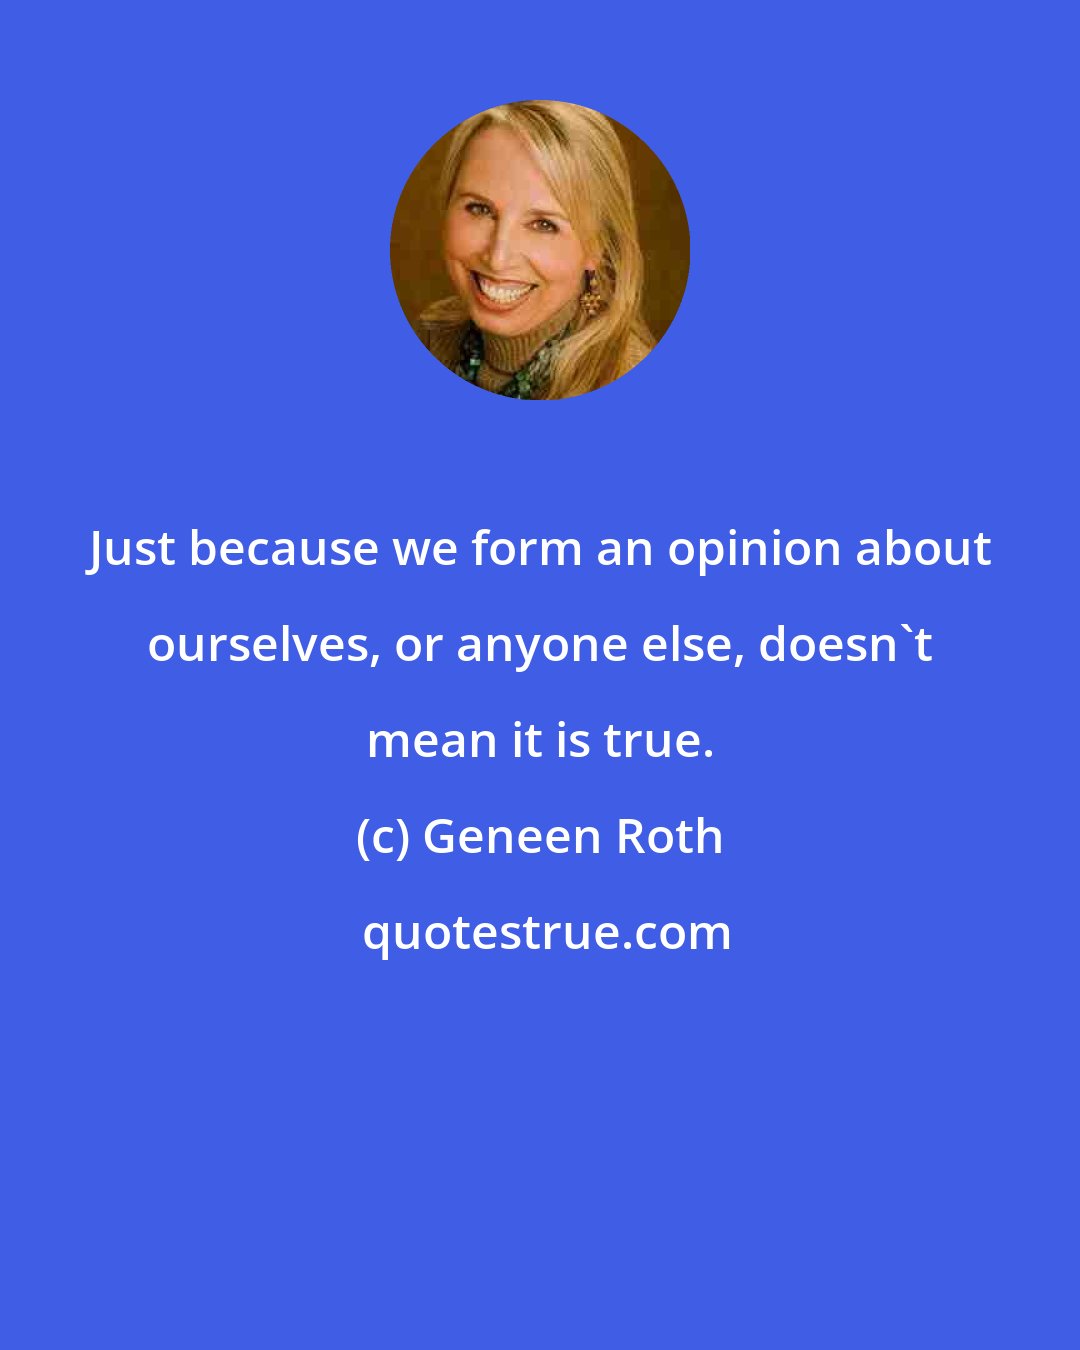 Geneen Roth: Just because we form an opinion about ourselves, or anyone else, doesn't mean it is true.